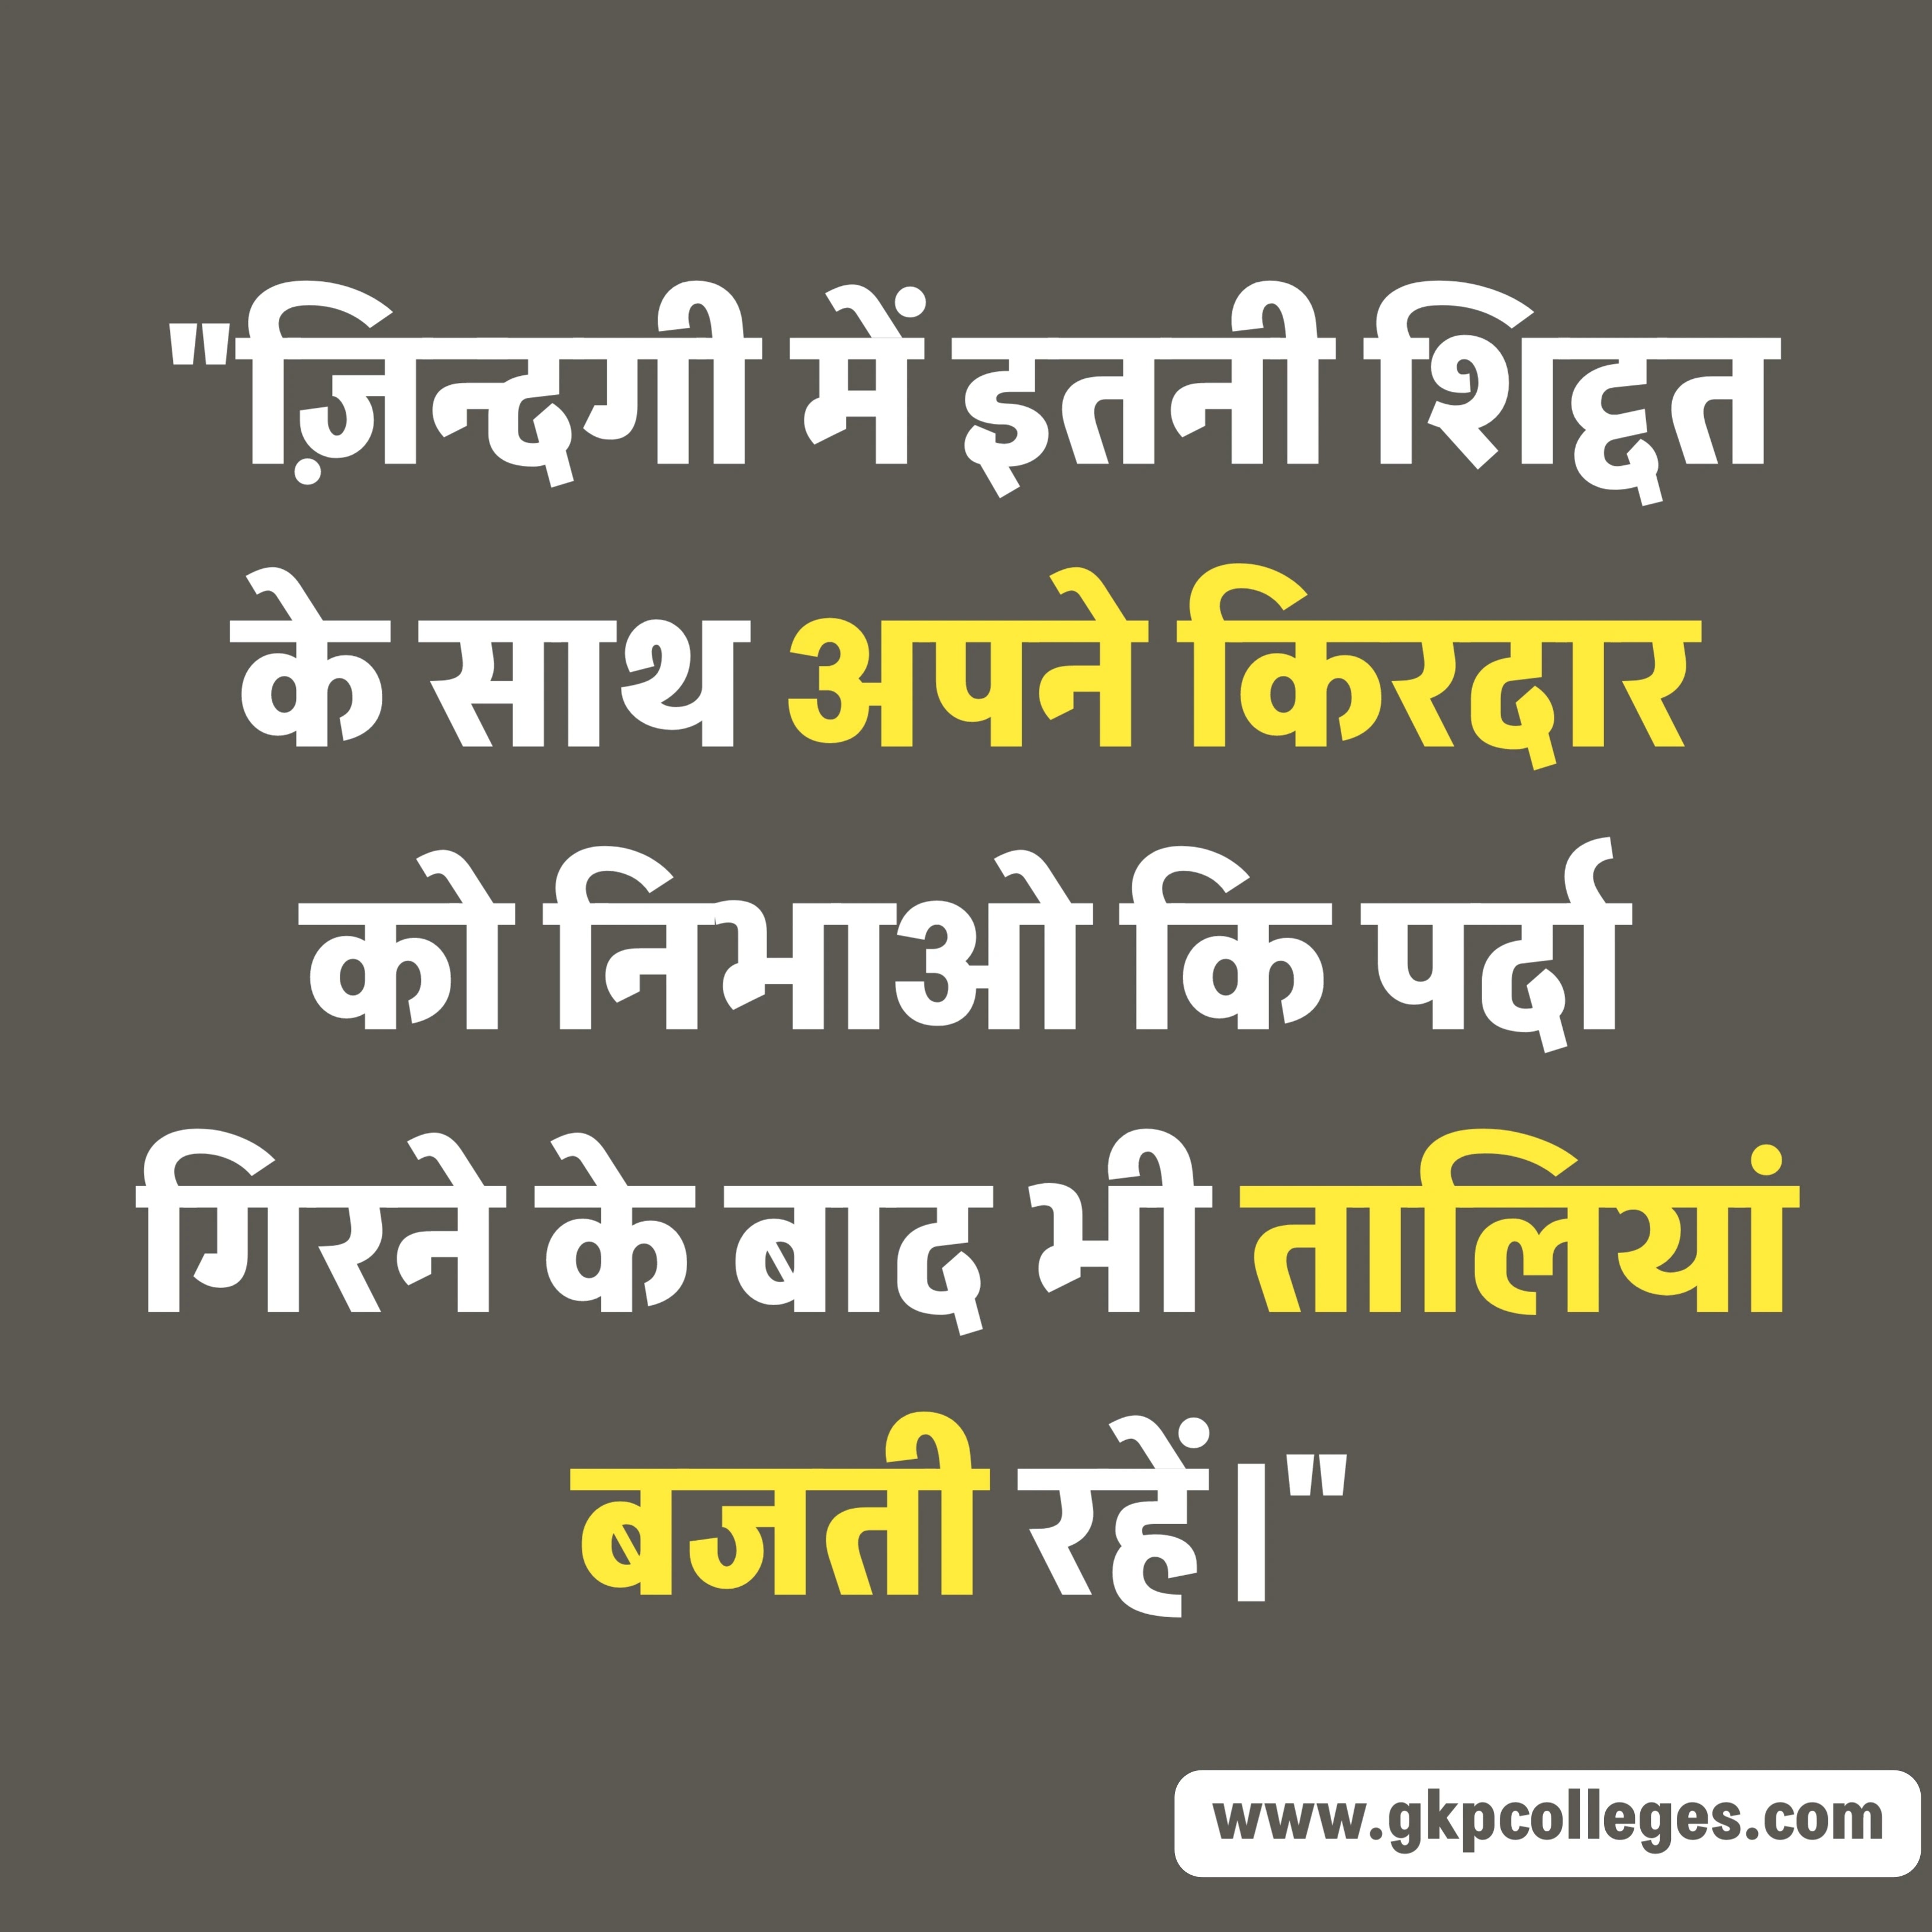 Best Hindi Quotes on Life 4